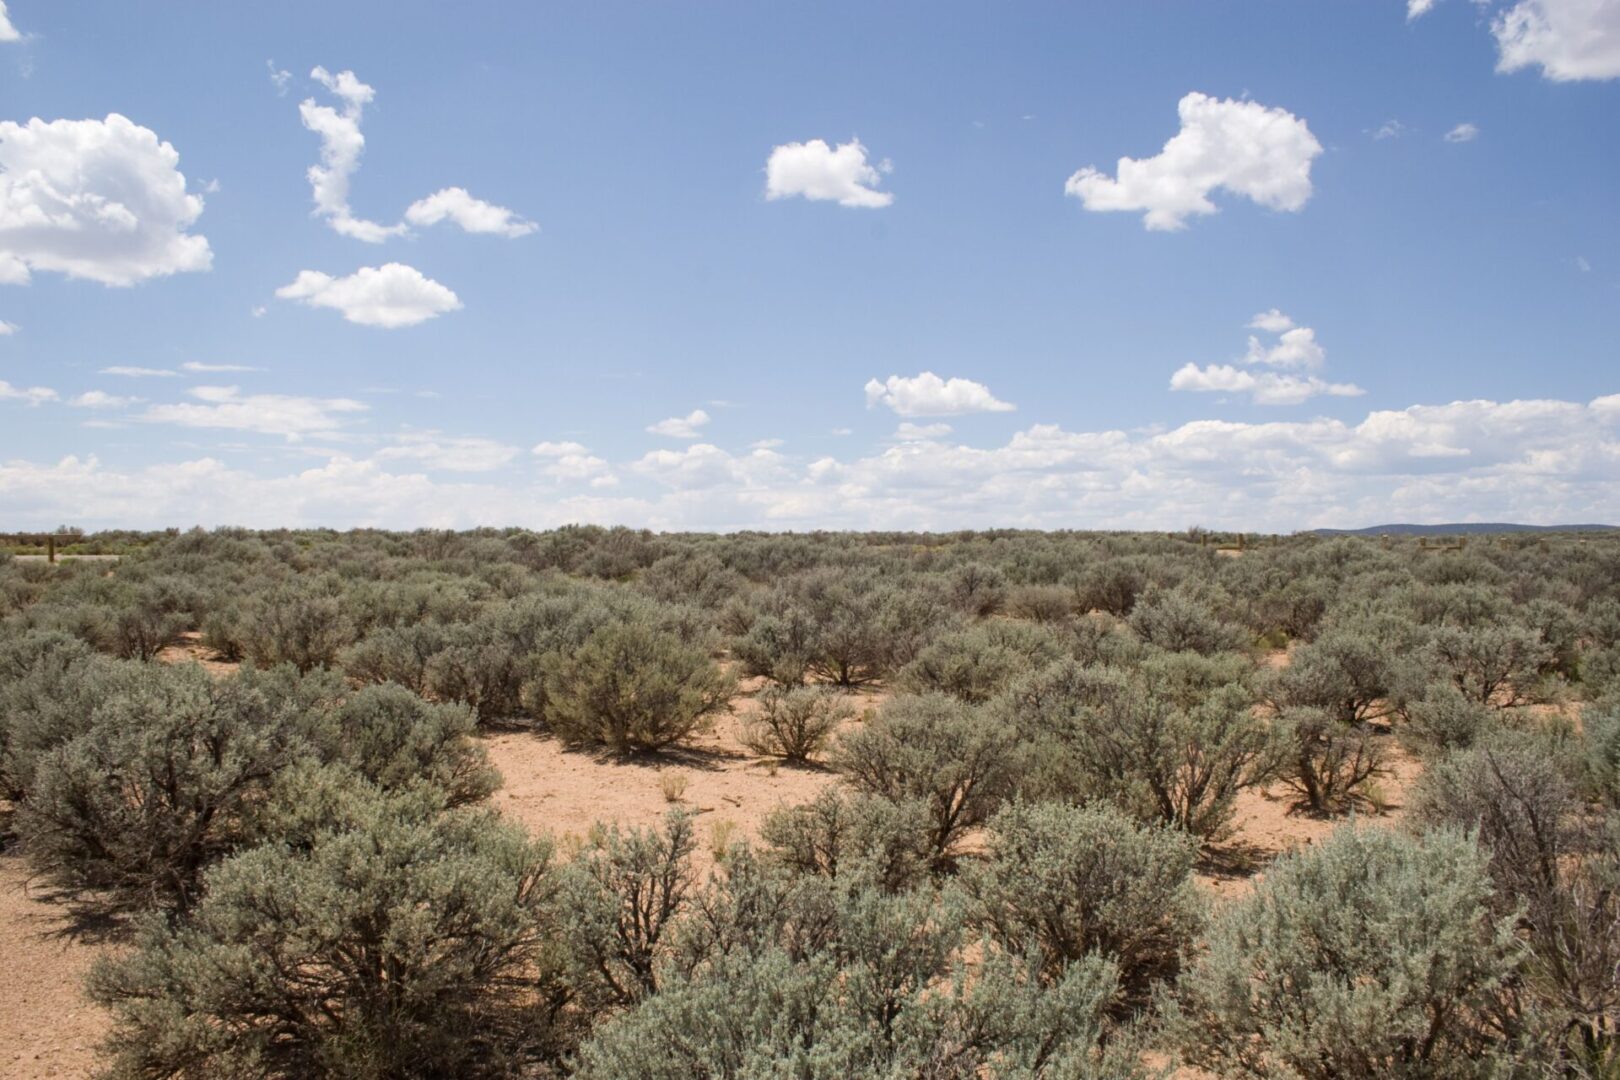 A desert area with many trees and bushes.